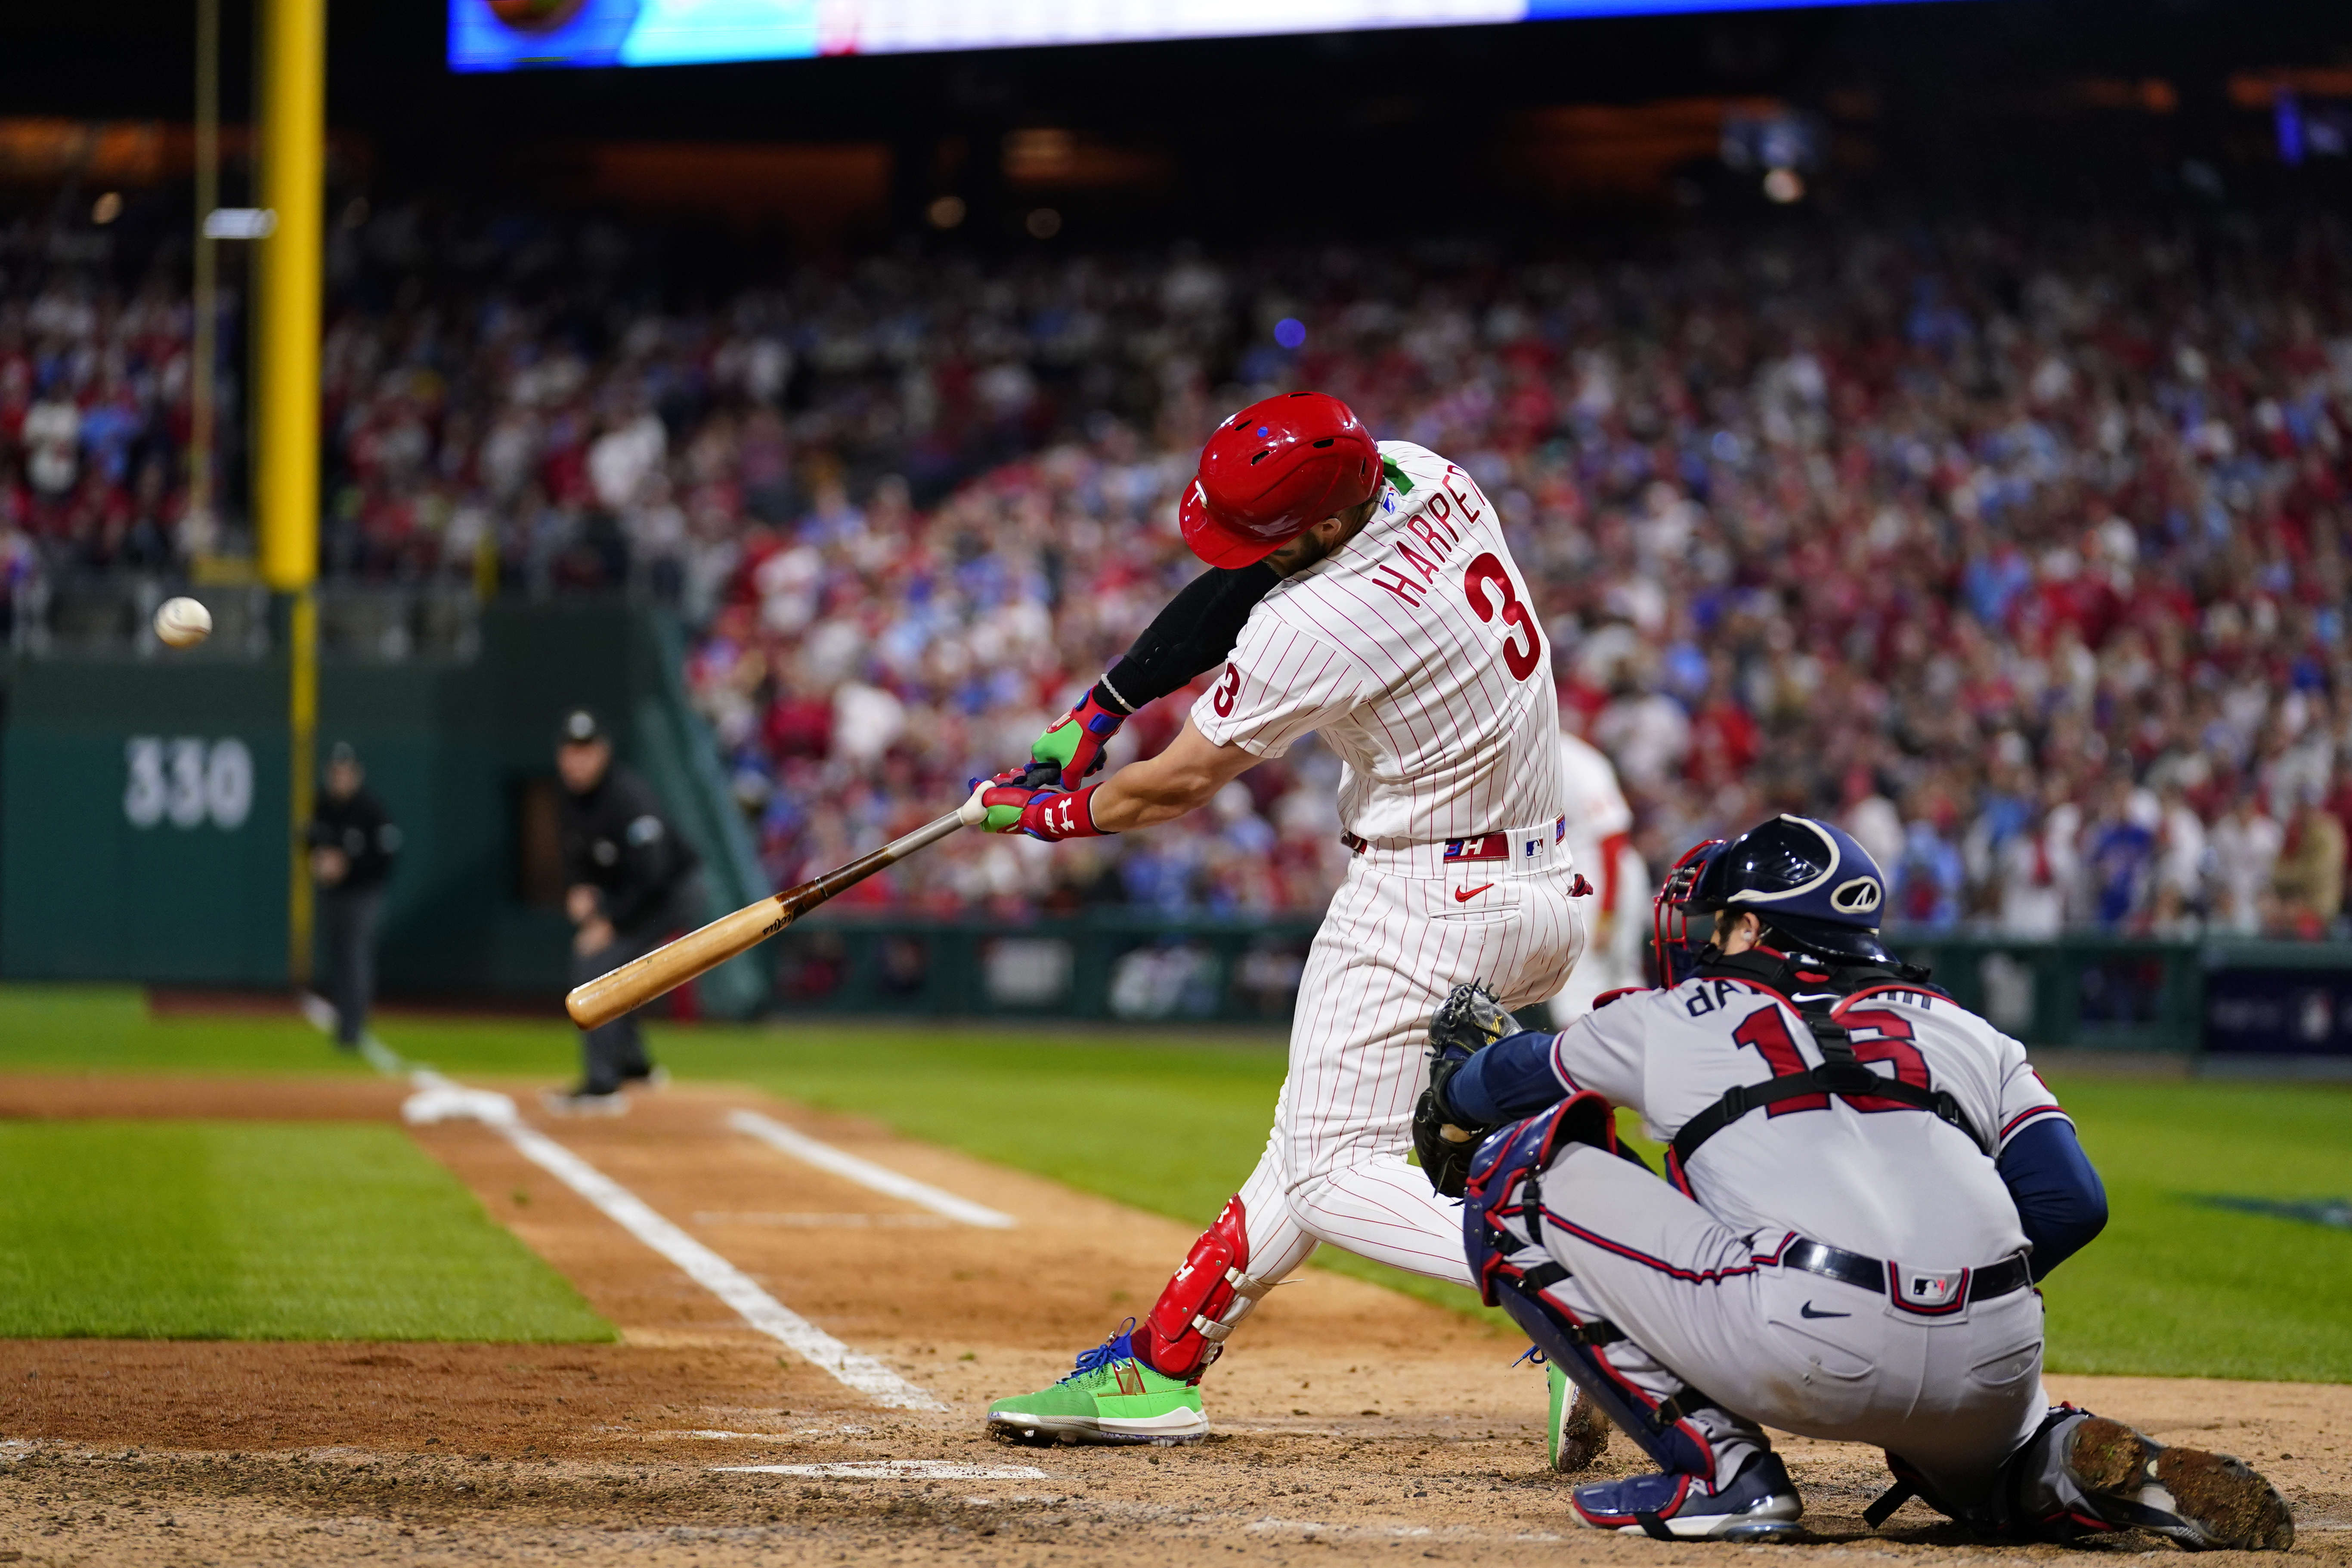 Phillies fans triggered noise notification warnings during Game 4 of the  NLDS